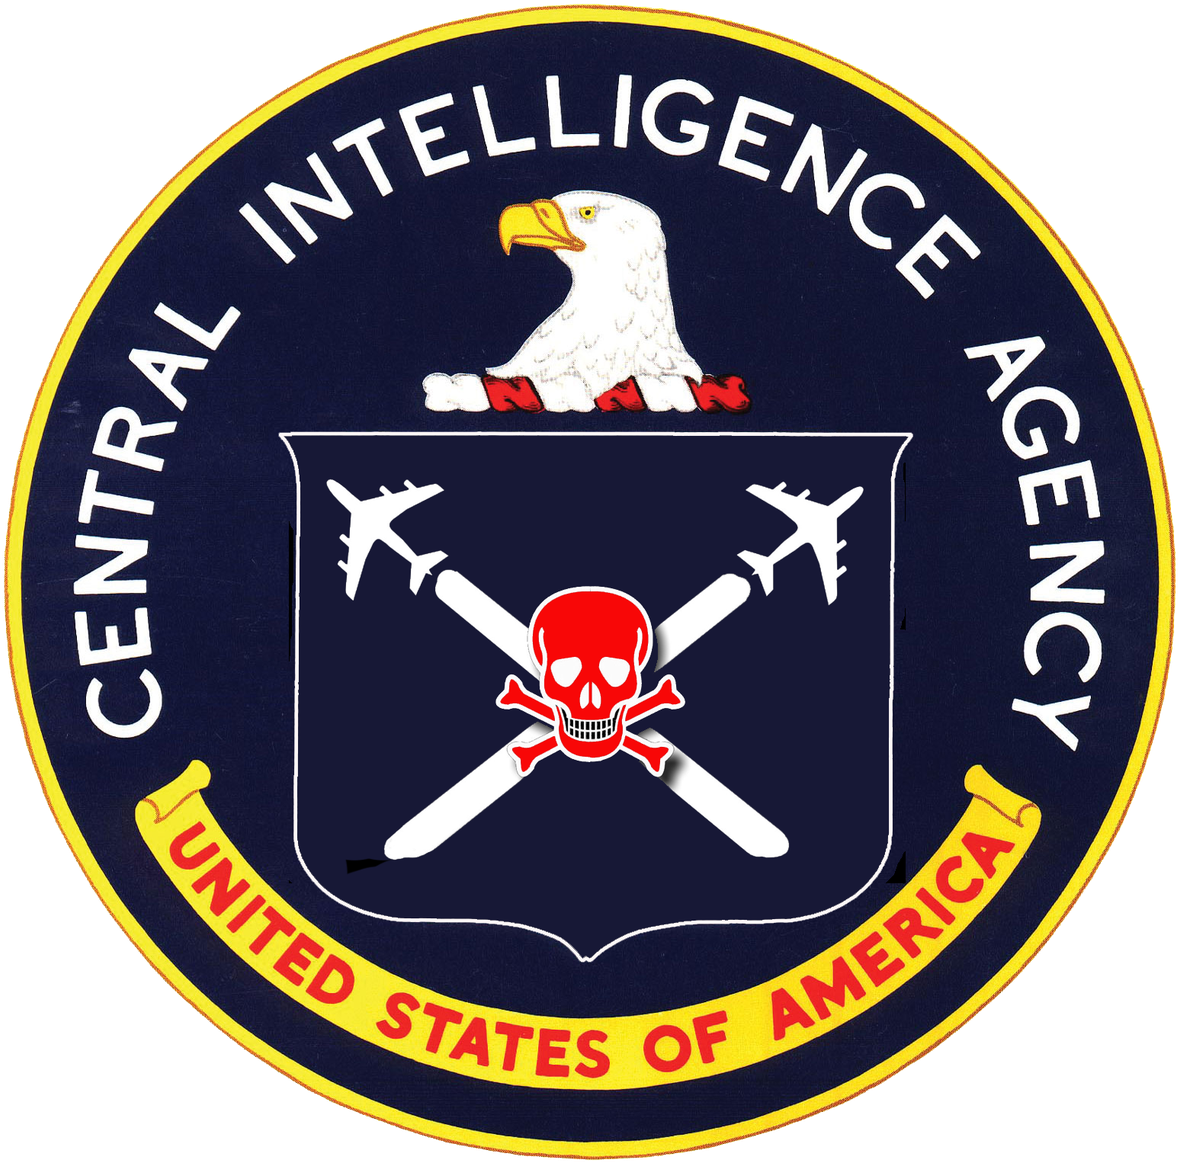 Cia Chemtrails Logo Copy Chemtrails The Exotic Weapon - Creation Of The Cia (1200x1192)